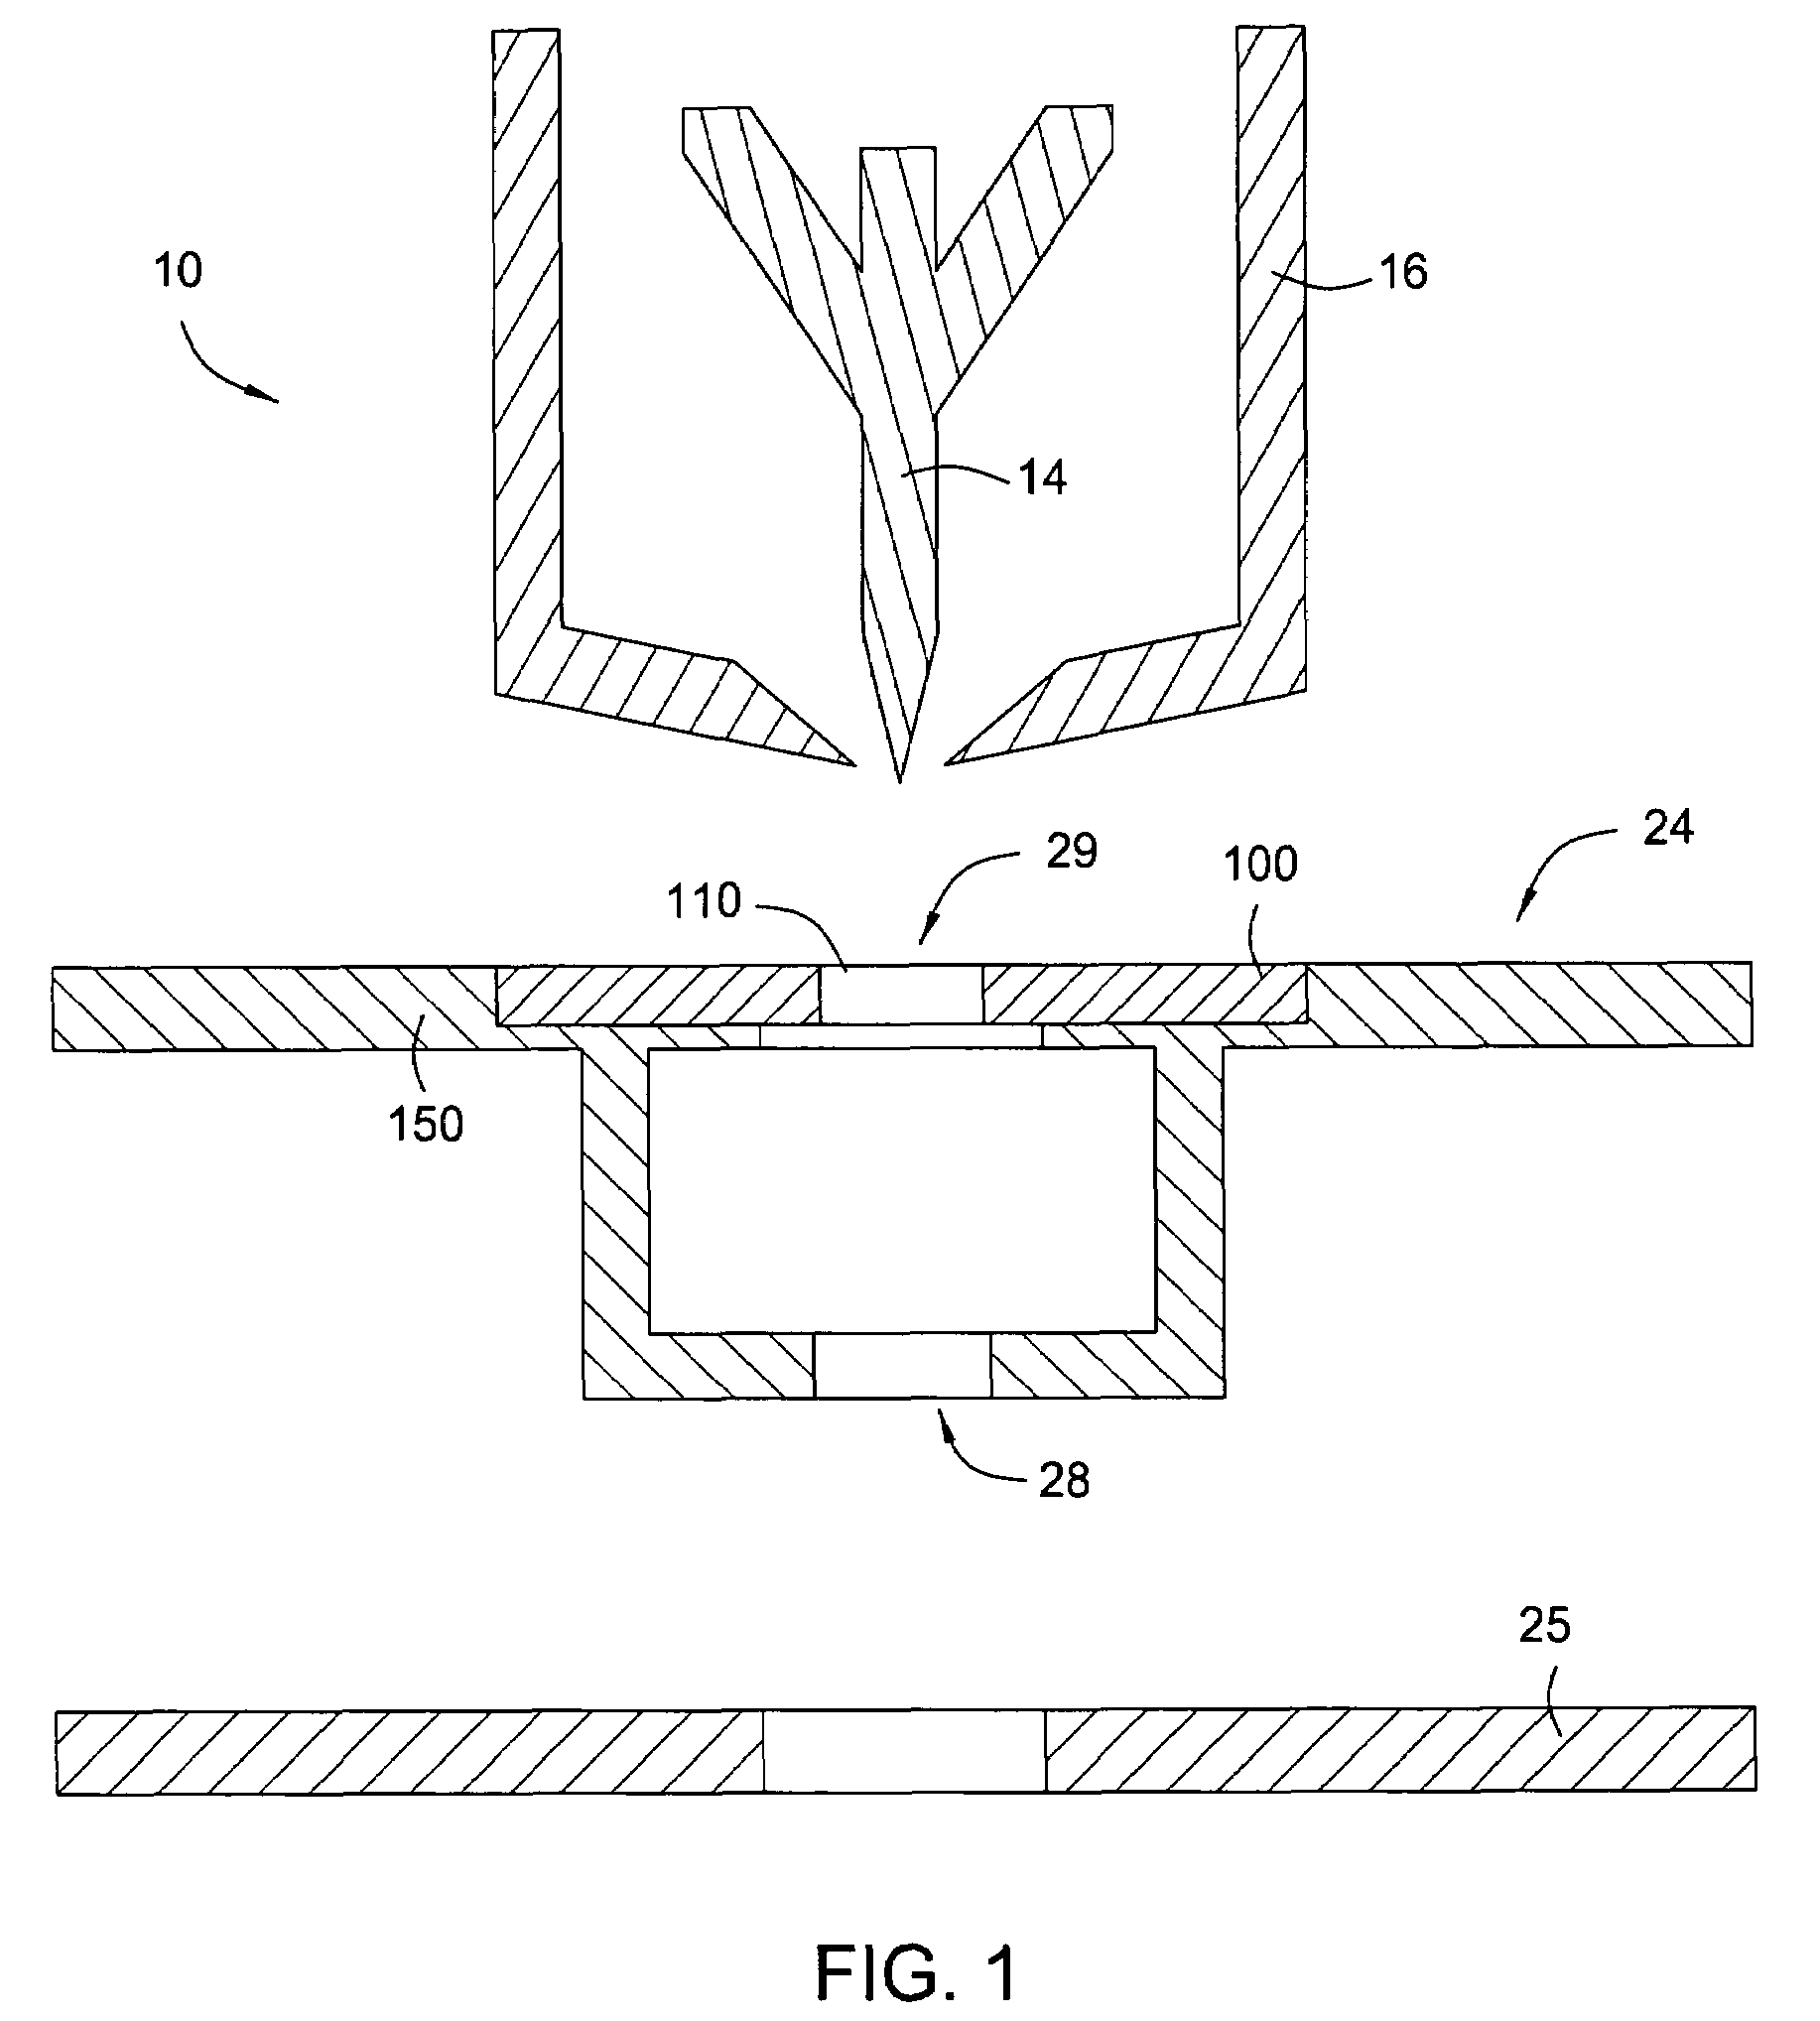 Electron beam source having an extraction electrode provided with a magnetic disk element